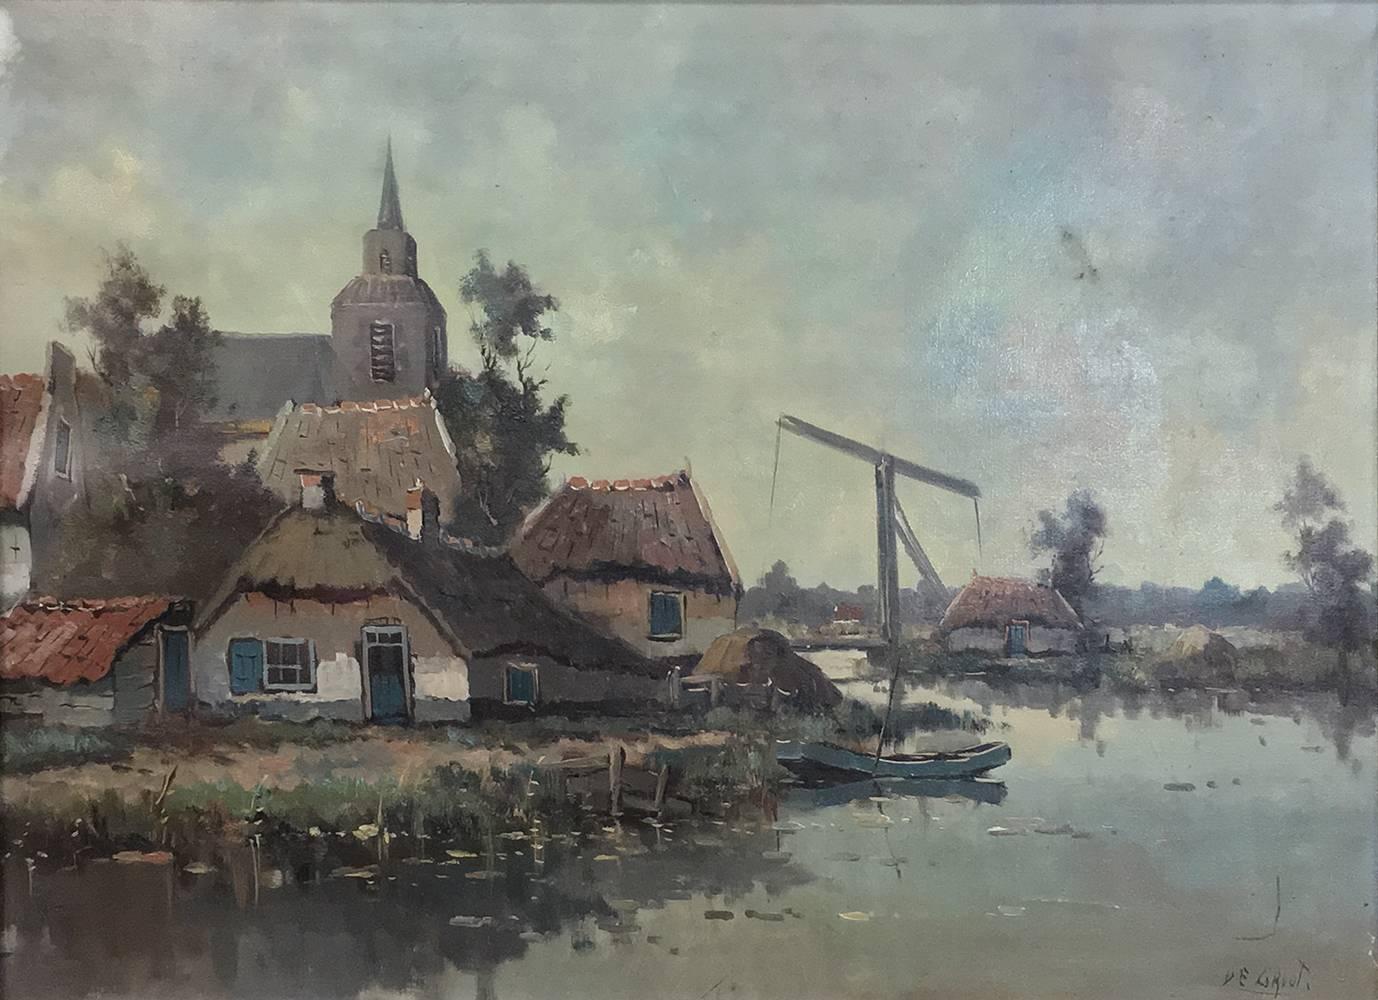 19th century framed oil painting on canvas by deGroot is a wonderful window into 18th and 19th century European coastal life, where the waterways leading to the ocean were of critical importance, yet the villages nearby would be entirely dependent